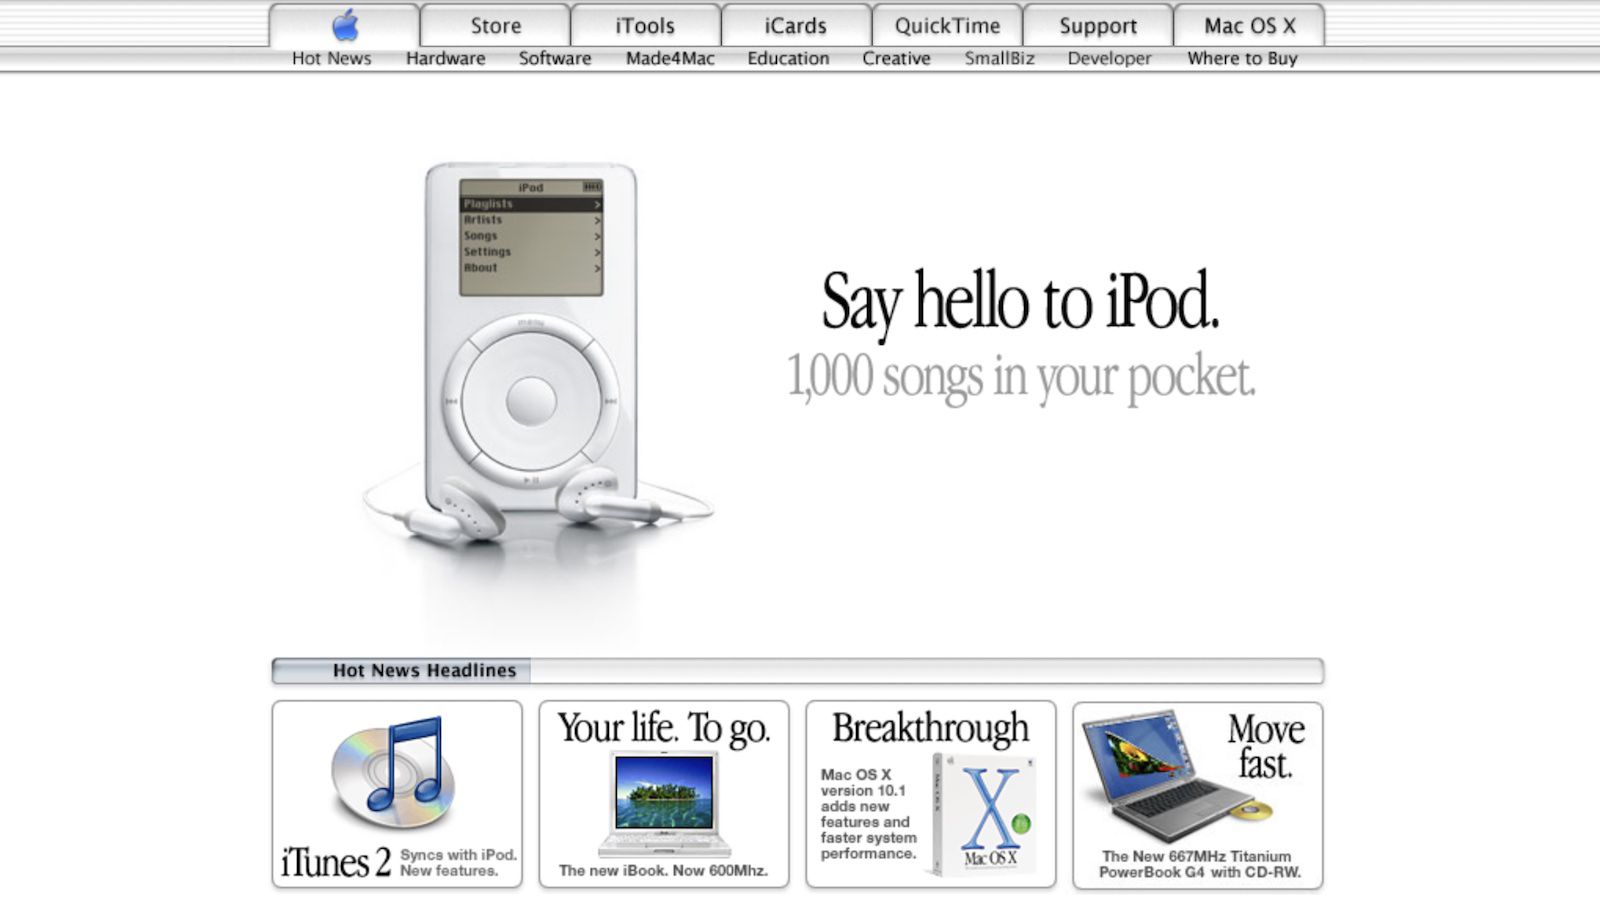 Today Marks the 20th Anniversary of Steve Jobs Introducing the iPod